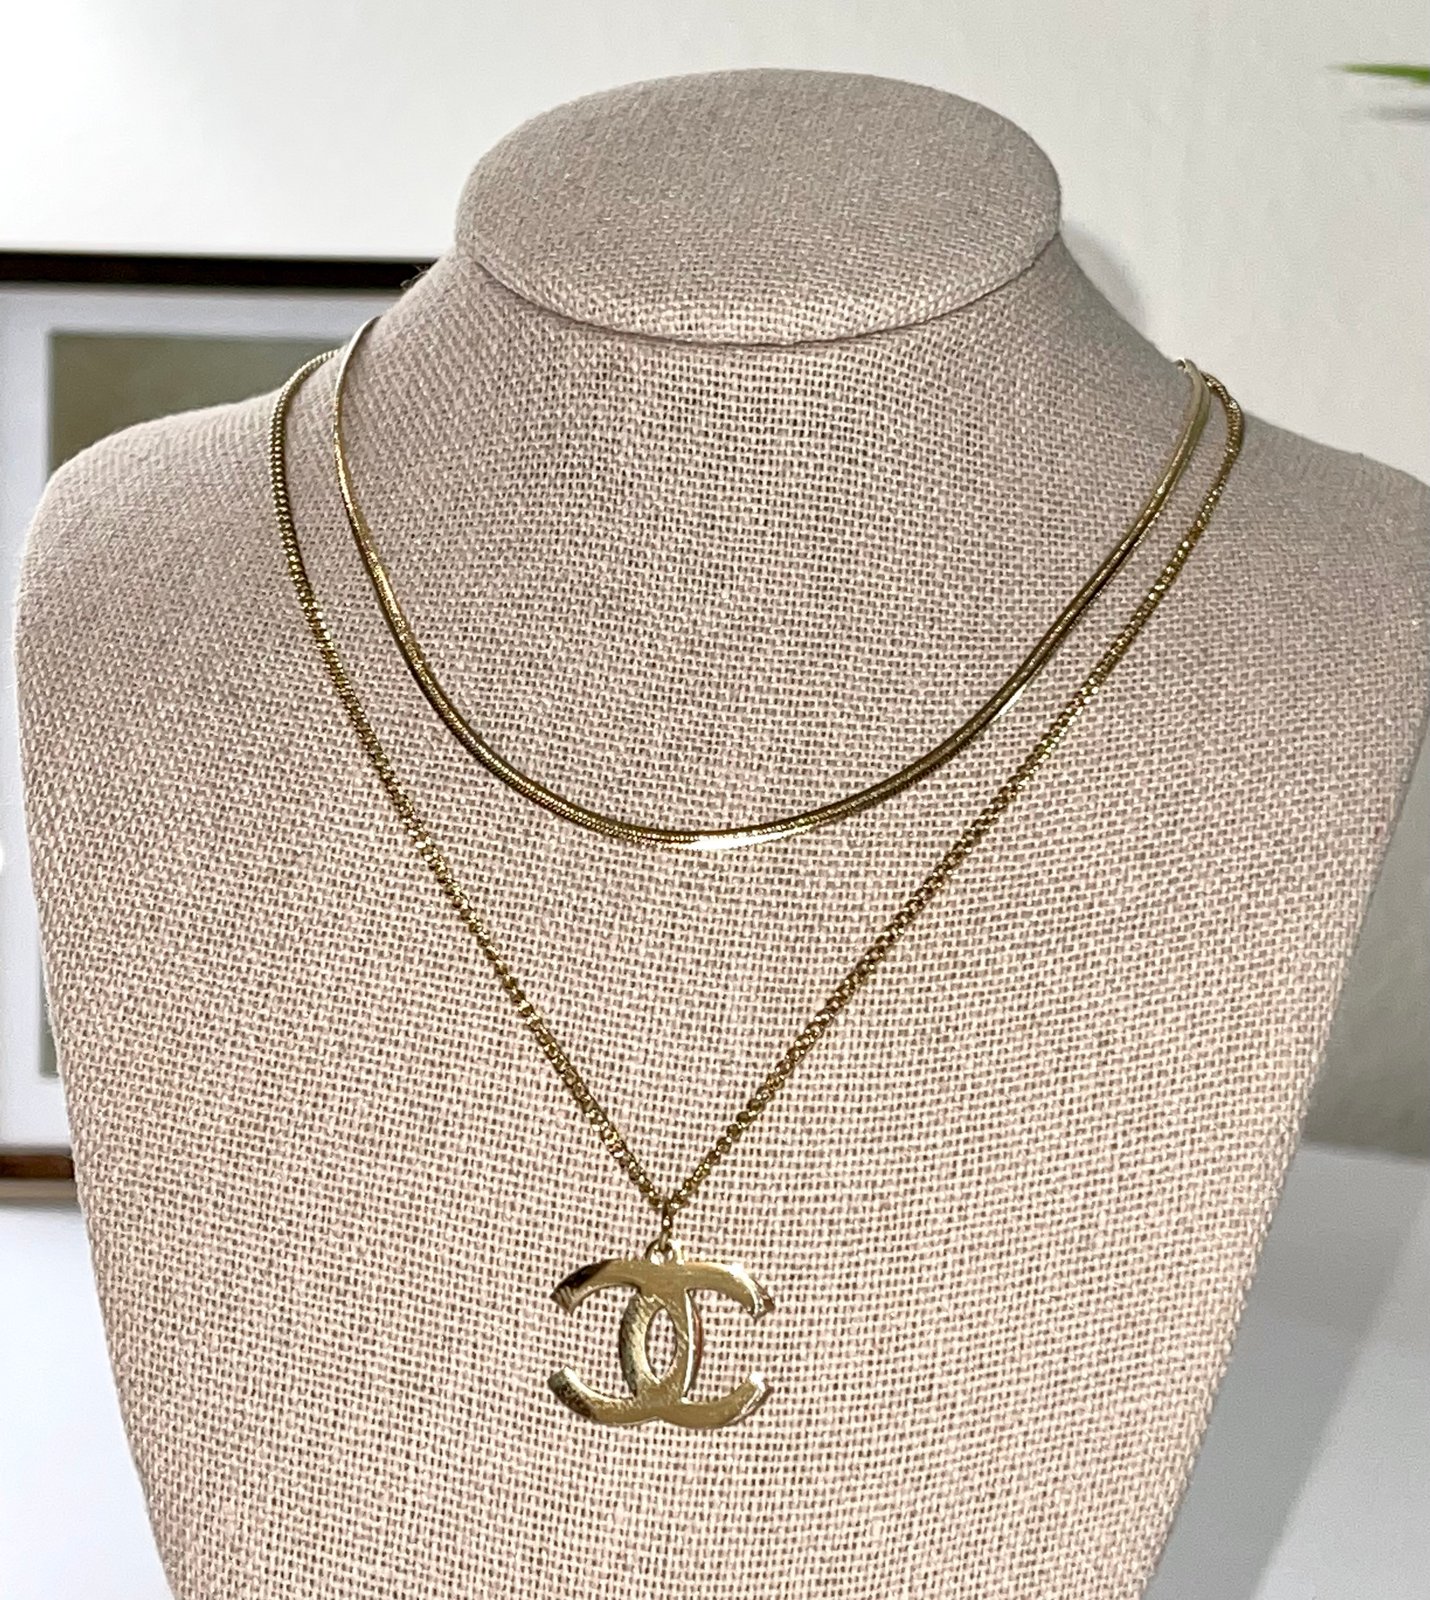 Lot 2  A CHANEL DOUBLE C PENDANT on a chain boxed